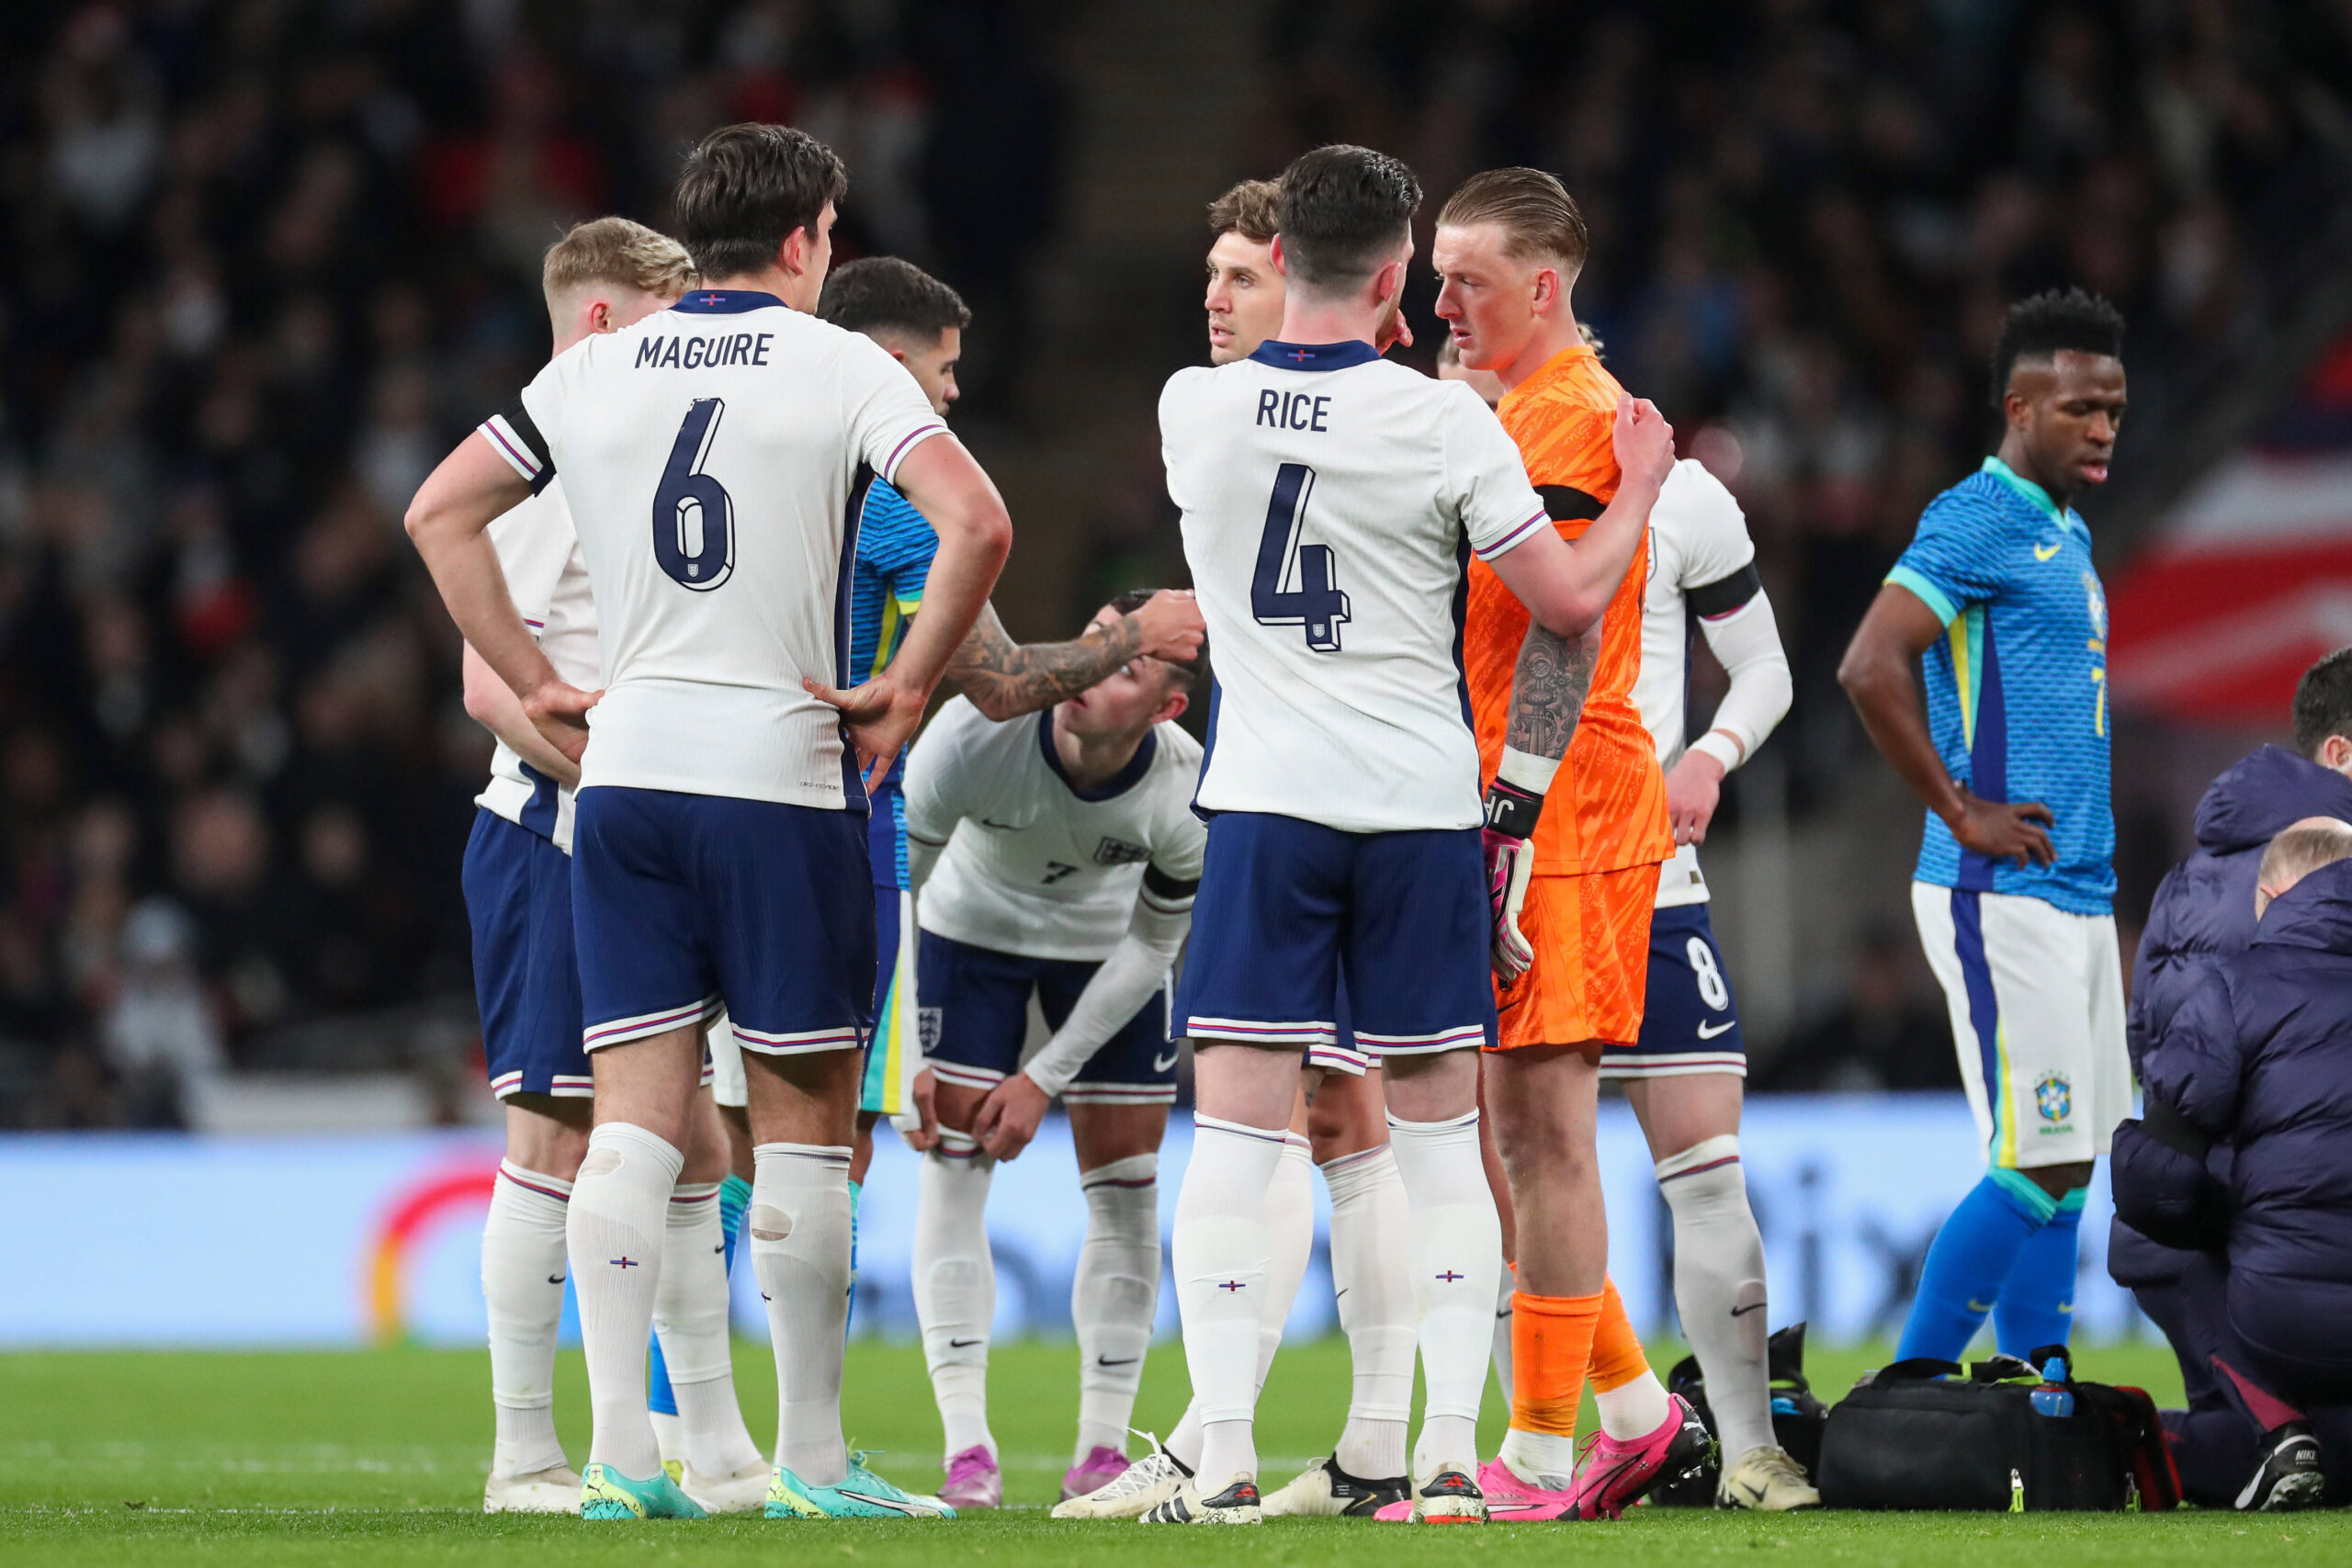 Declan Rice England captain stood with Harry Maguire, Jordan Pickford and England team-mates vs Brazil